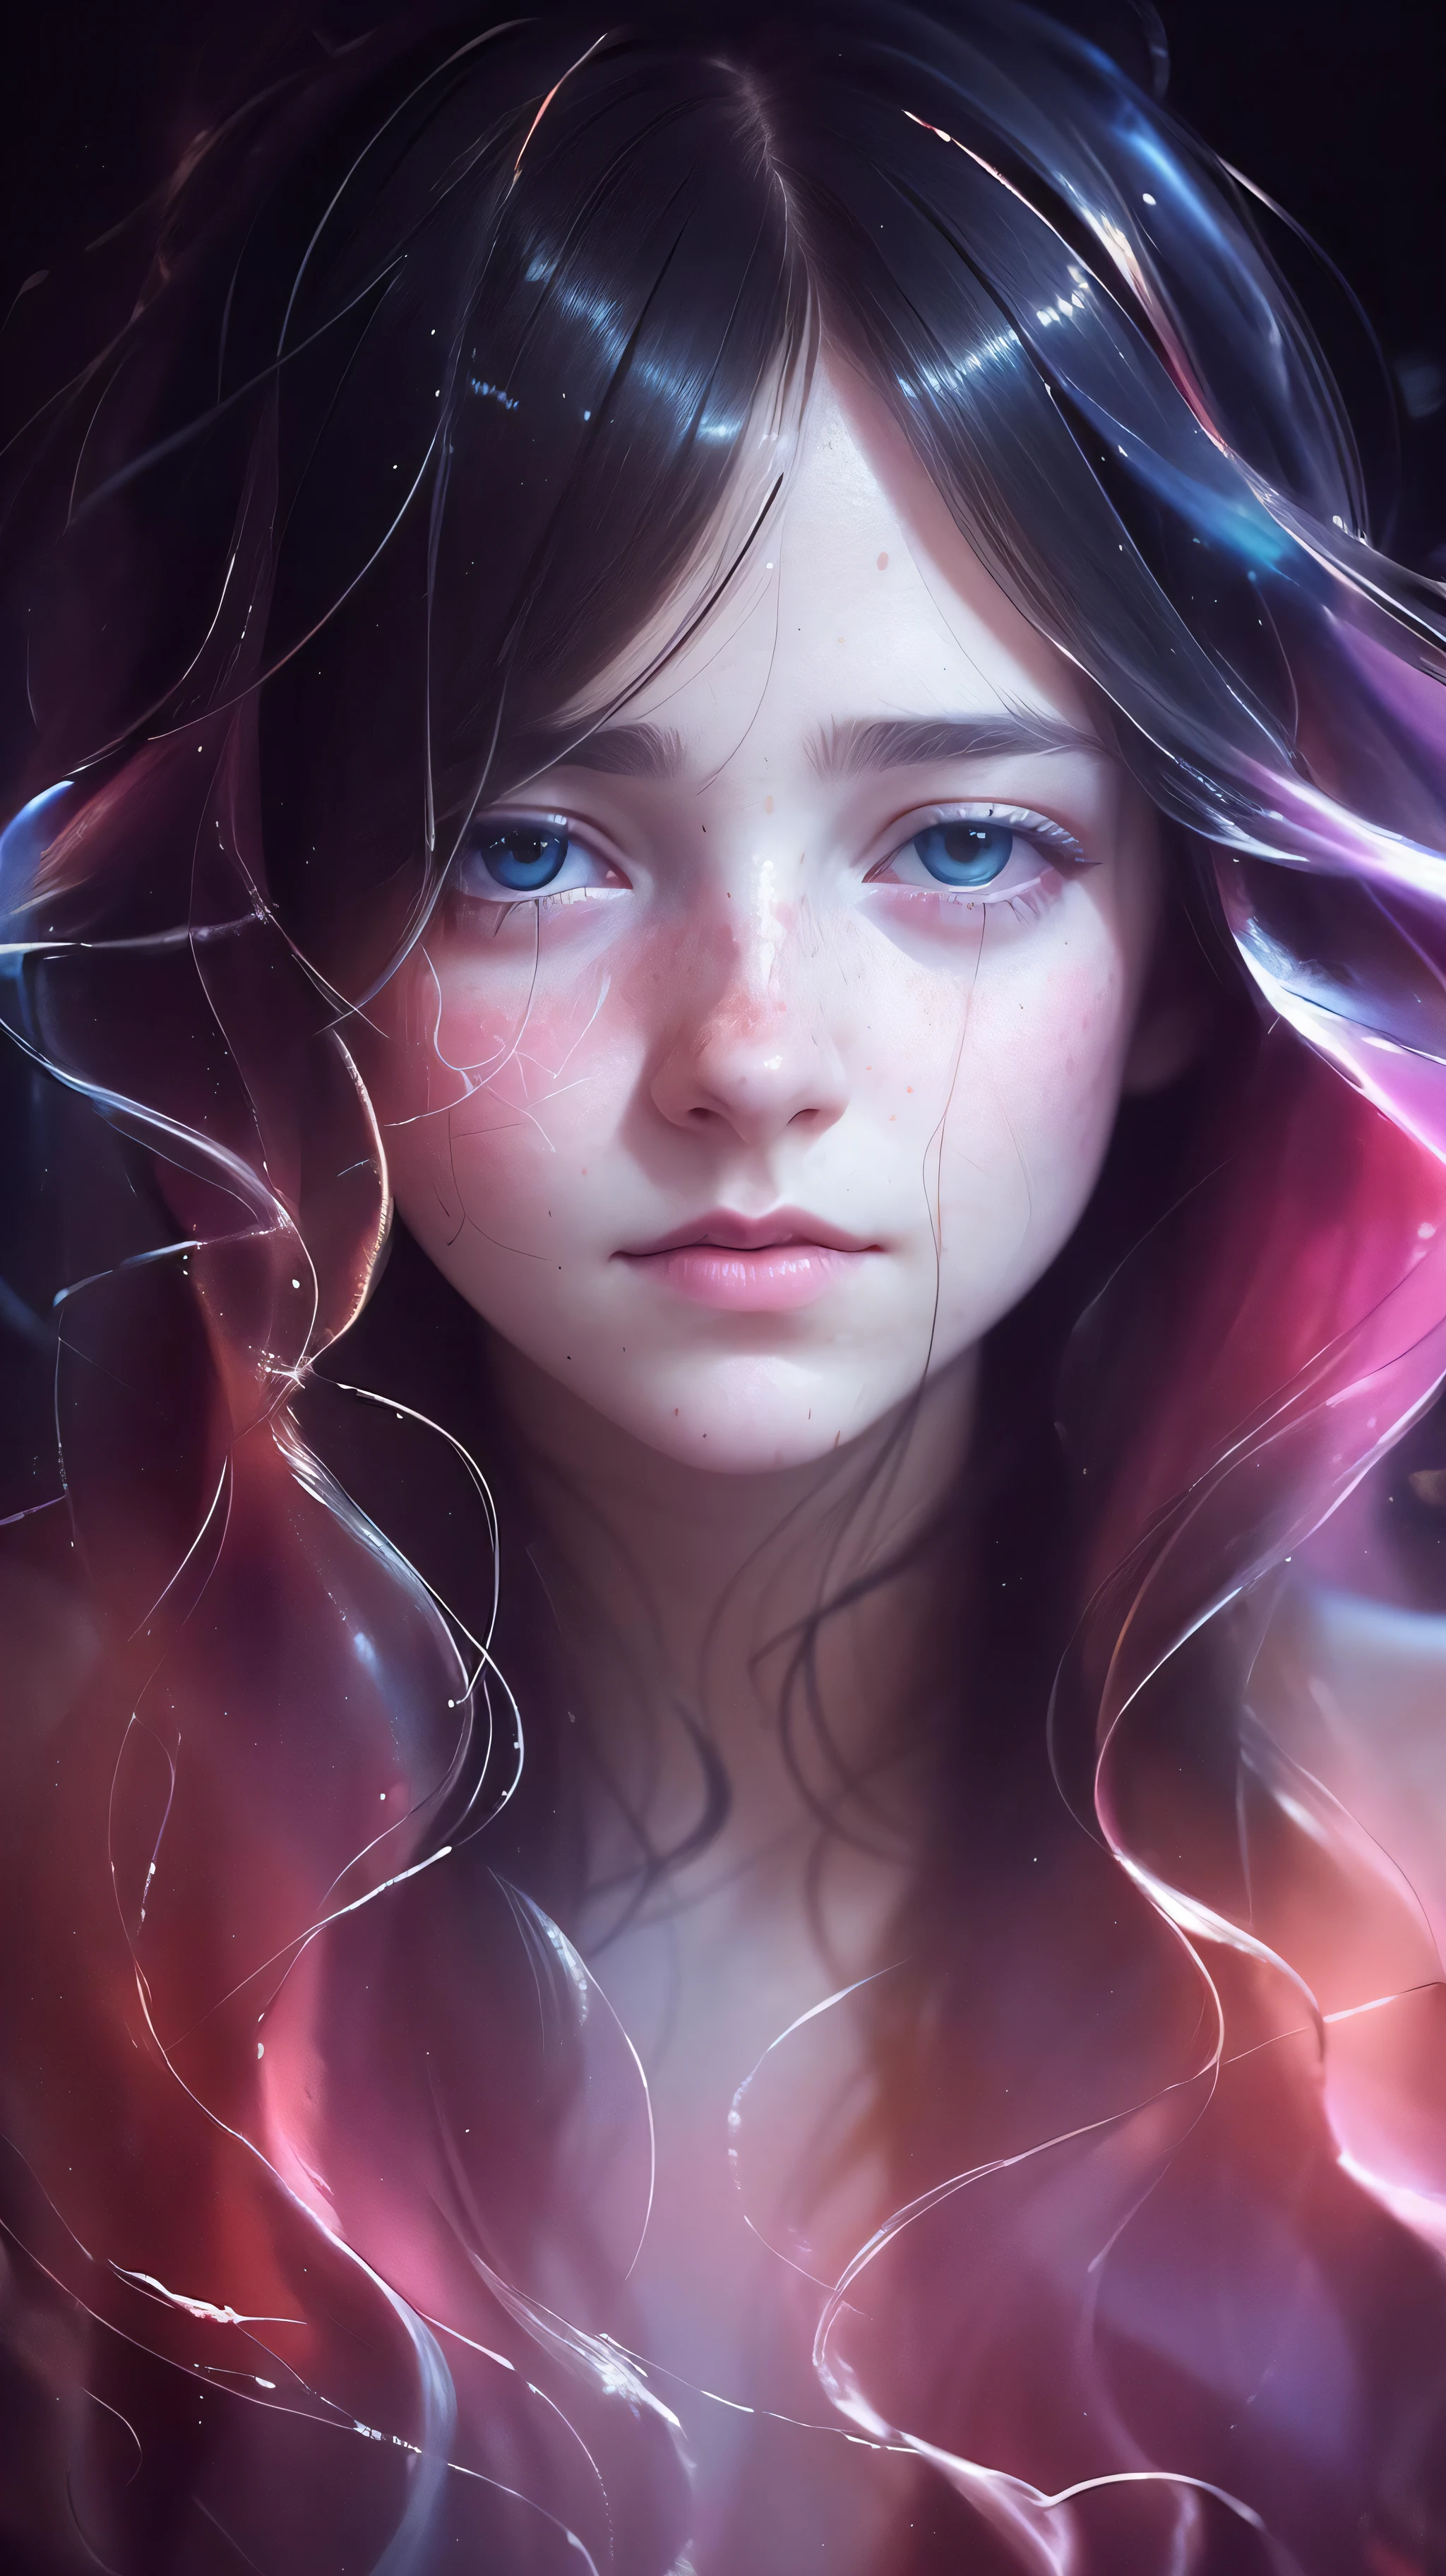 A (Niedlich:1.1) Mädchen, (epic portrAit:0.85), flowing hAir, sweAty skin, Nacht, [[soft cinemAtic light, Adobe lightroom, photolAb, HDR, intricAte, highly detAiled, ]], (((by AlAn kenny, by Agnes cecile ))), (Tiefenschärfe), epic reAlistic, mysticAl hAze